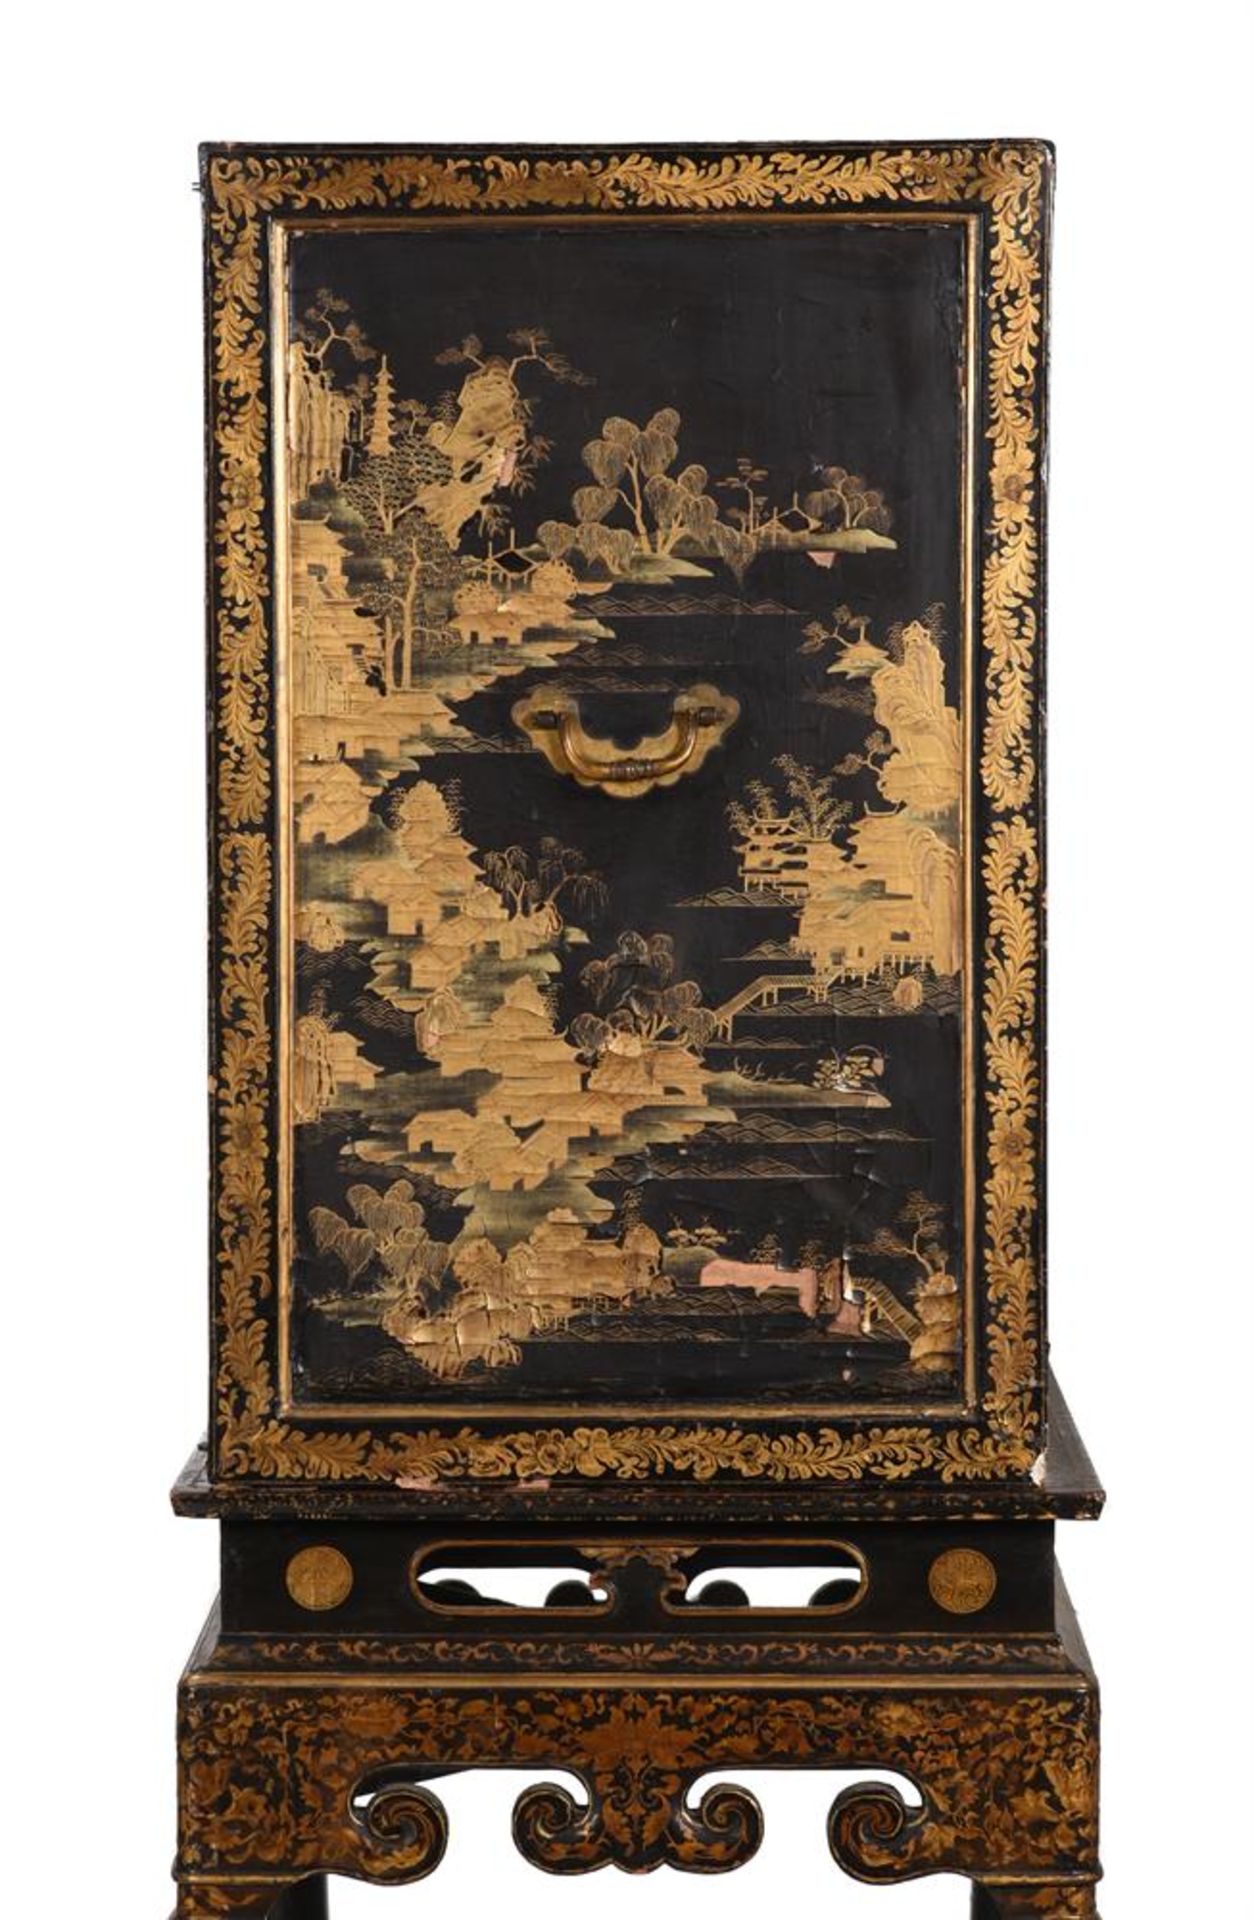 A CHINESE EXPORT LACQUER CABINET ON STAND, LATE 18TH OR EARLY 19TH CENTURY - Bild 13 aus 15